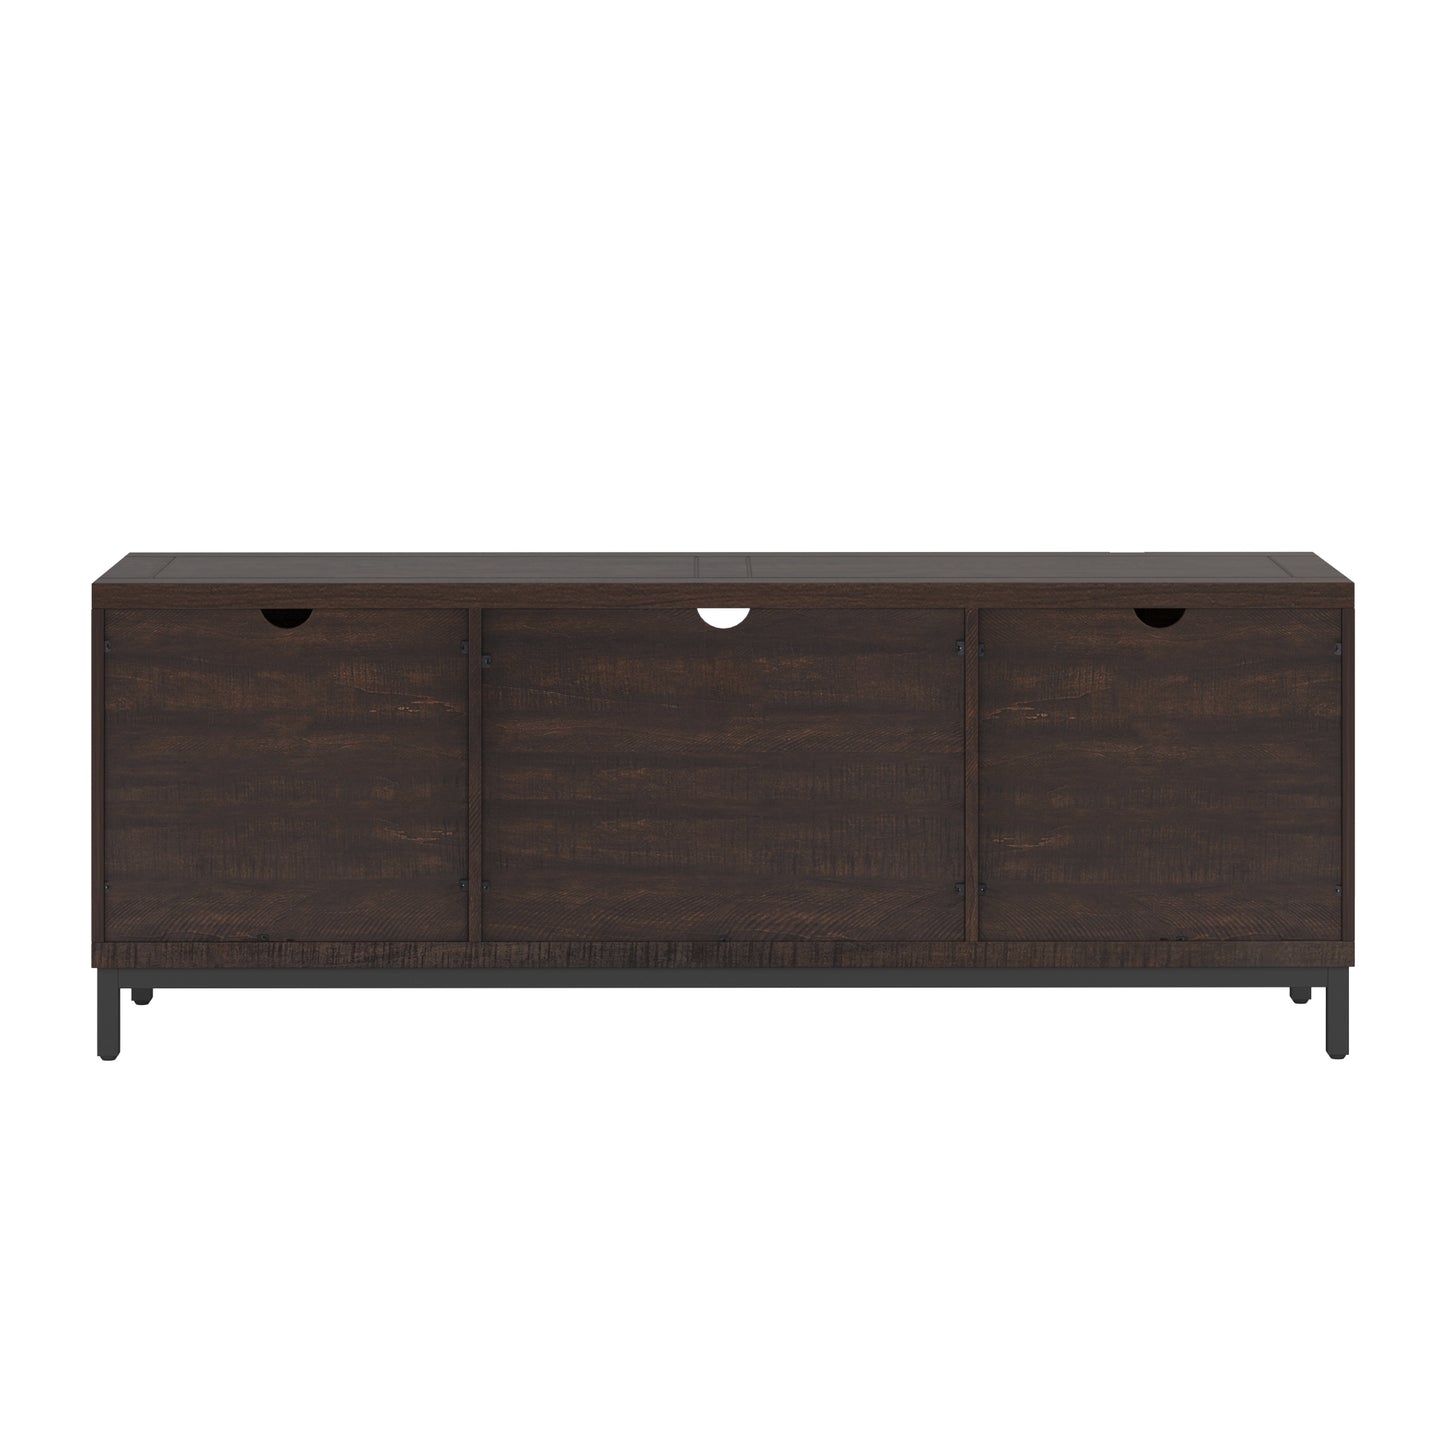 TV Stand for TVs up to 65" - Dark Brown Finish